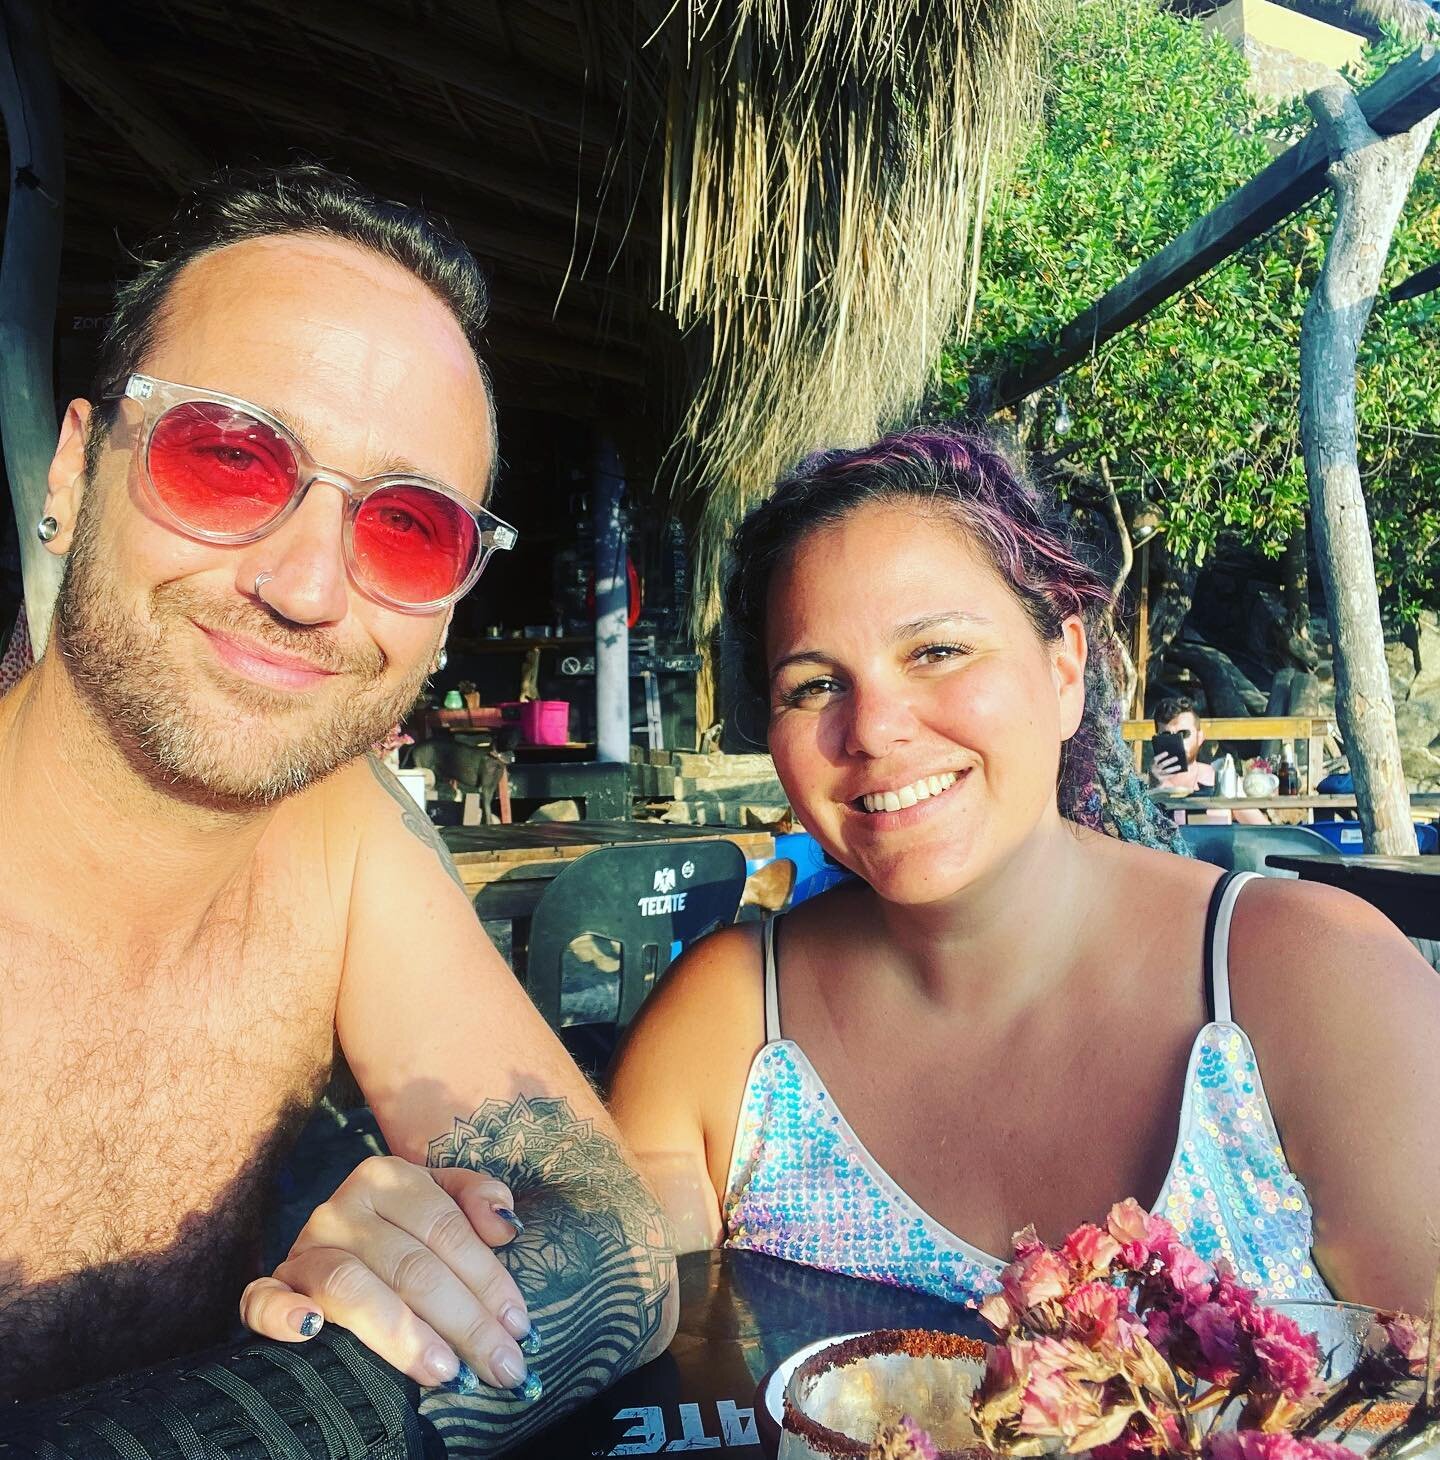 Spent a couple weeks in paradise with this babe and our friends from the north. 

Took daily dips into the Pacific and a social media cleanse too. I&rsquo;m back mu&rsquo;trucka&rsquo;s!